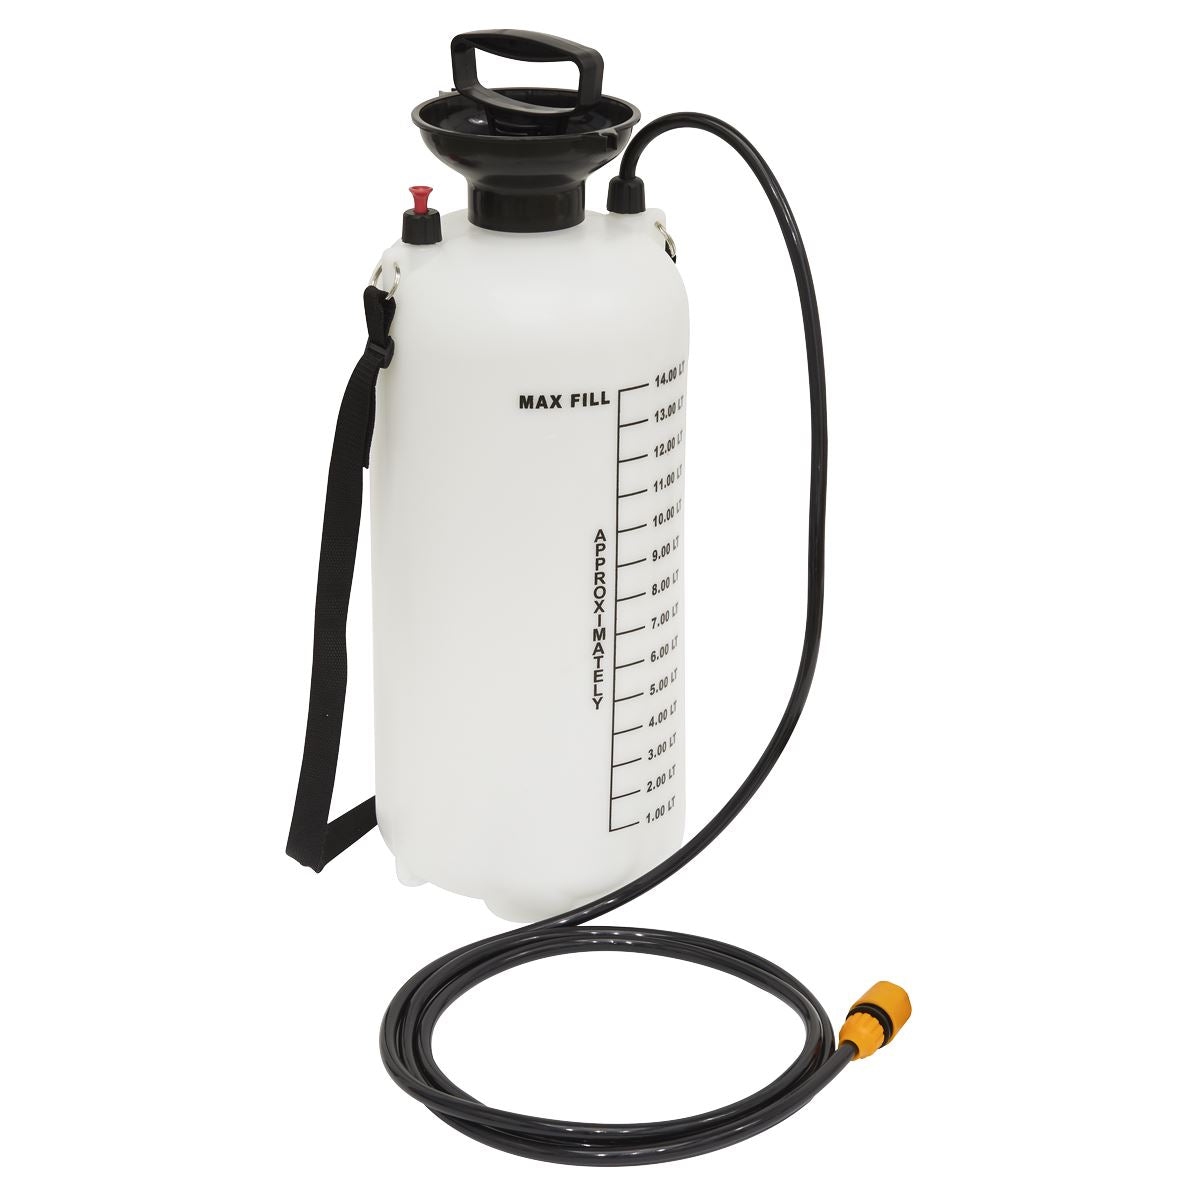 Worksafe by Sealey Dust Suppression Water Tank 14L